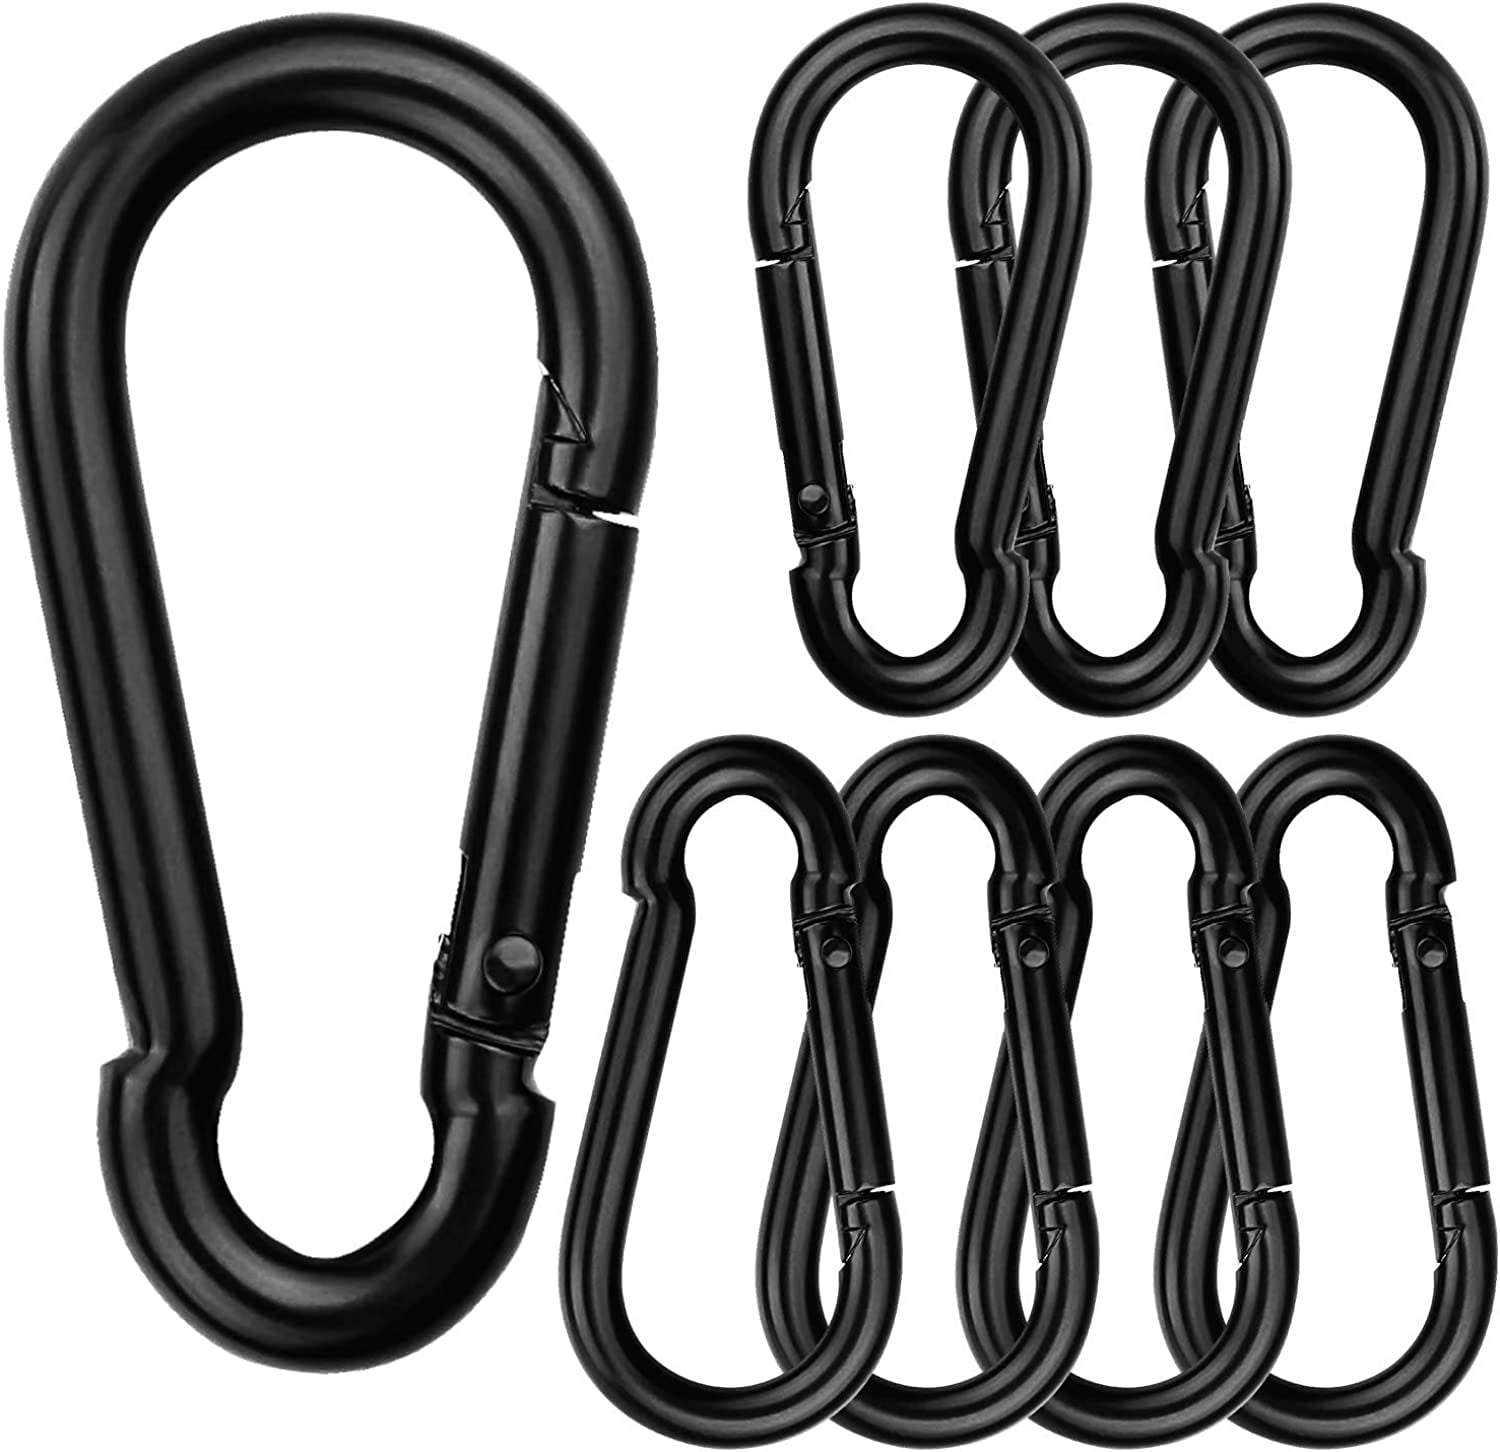 8 Pcs M8 Heavy Duty Spring Snap Hook Carabiner Clip 3.15 Inch (80mm) Non  Locking Black Carabiner Swing Clip for Swing Set, Camping, Hiking Indoor  and Outdoor Sports 